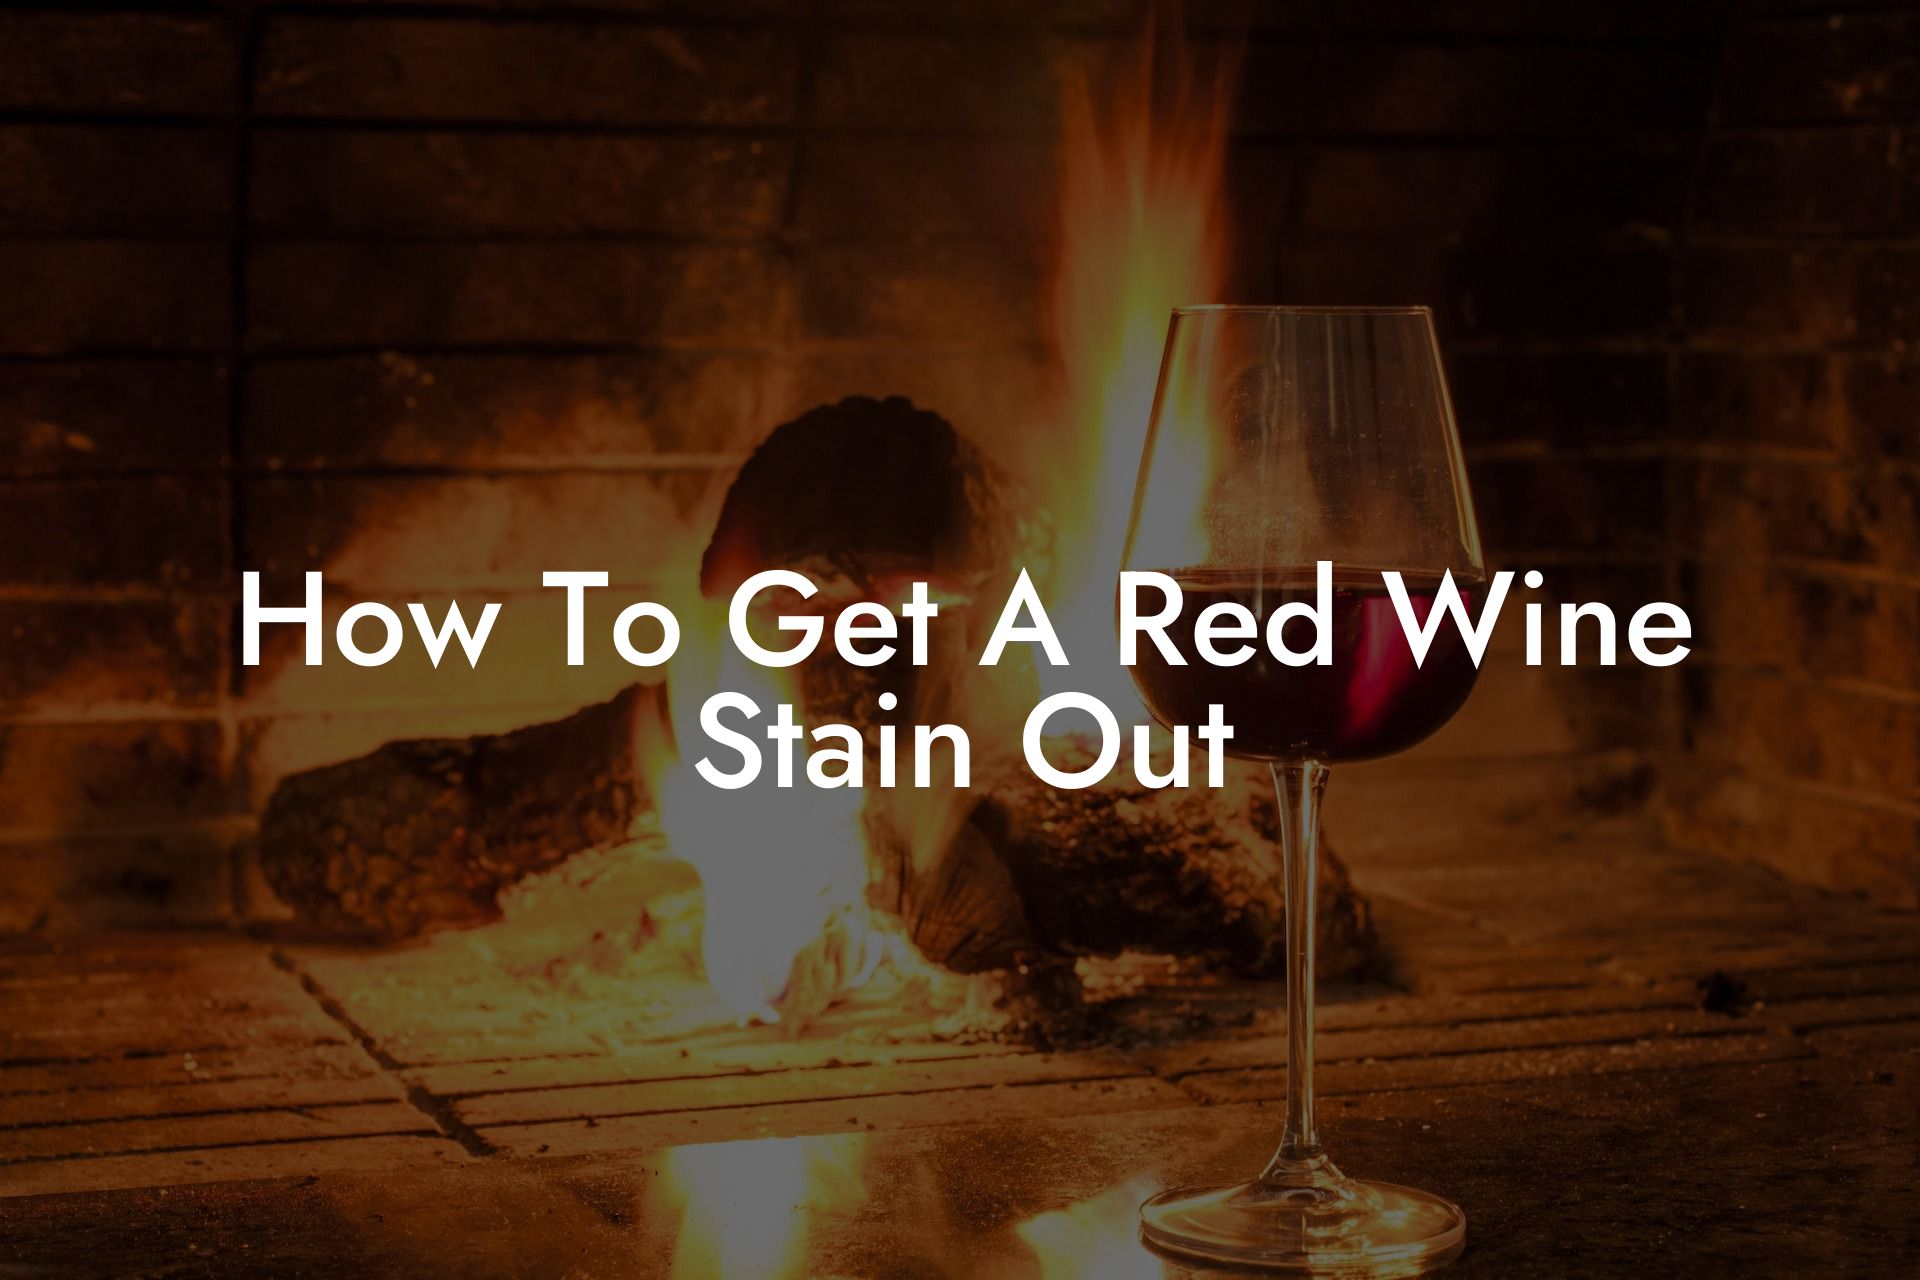 How To Get A Red Wine Stain Out